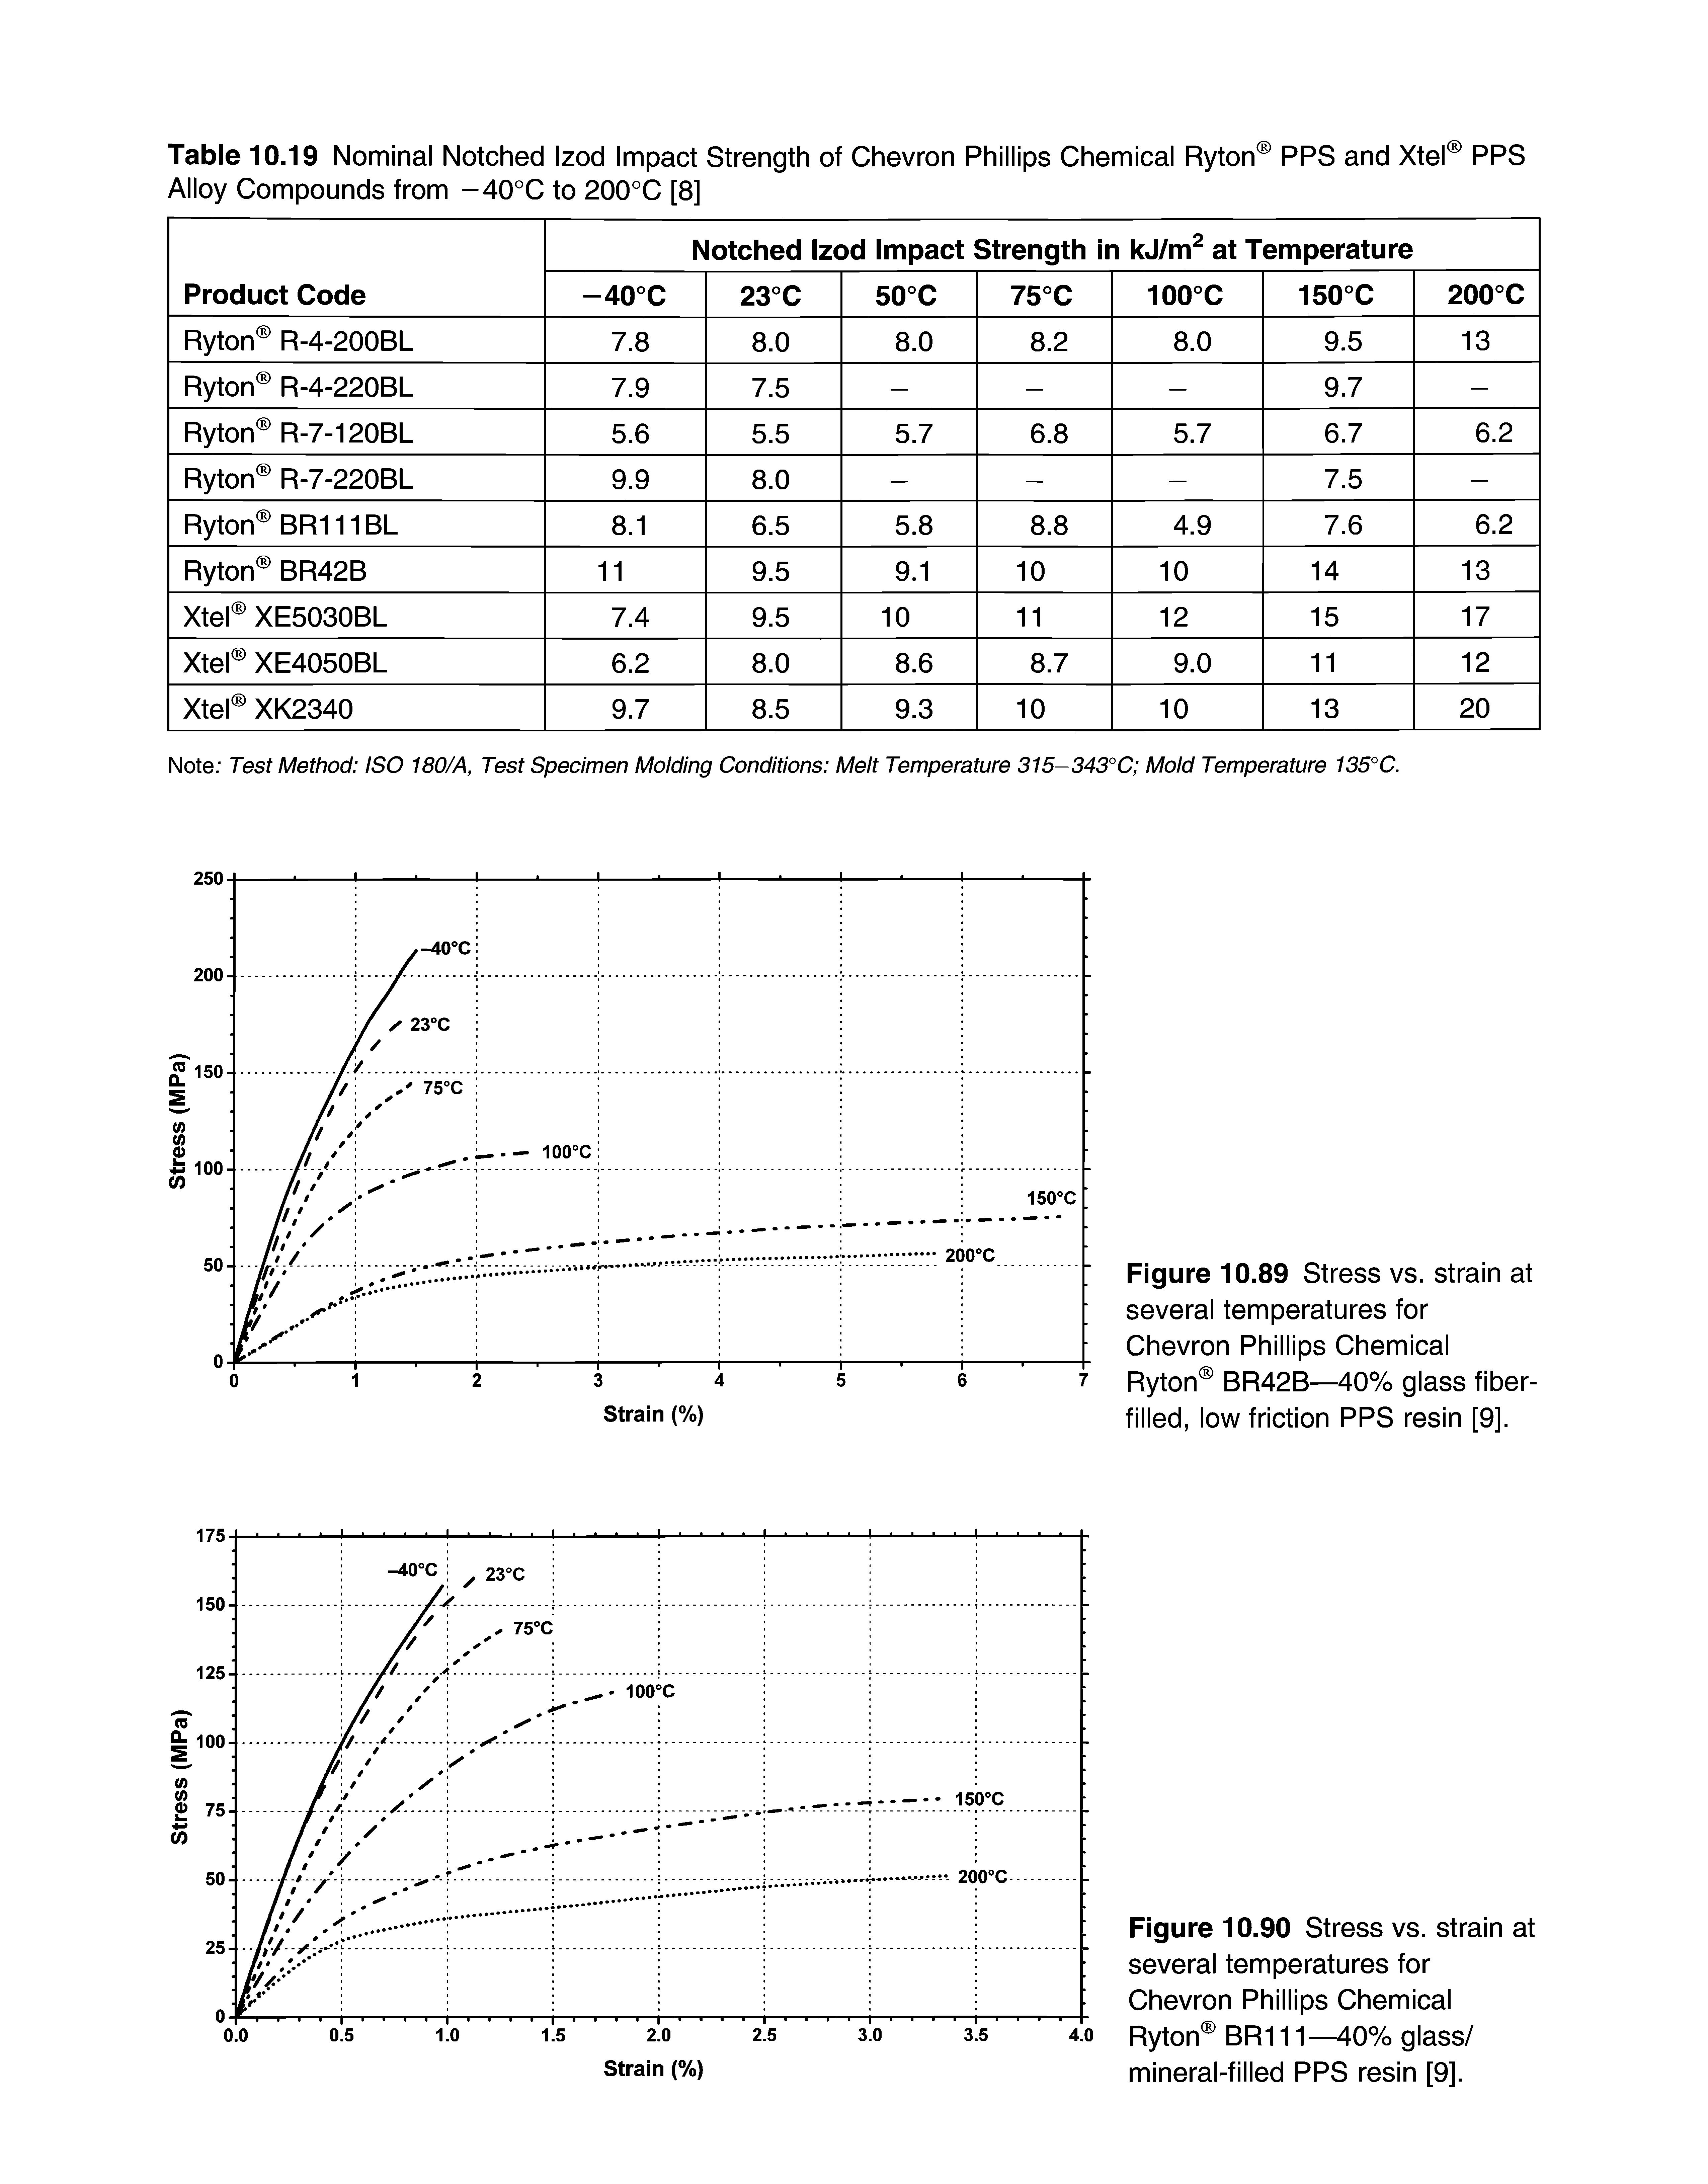 Figure 10.89 Stress vs. strain at several temperatures for Chevron Phillips Chemical Ryton BR42B—40% glass fiber-filled, low friction PPS resin [9].